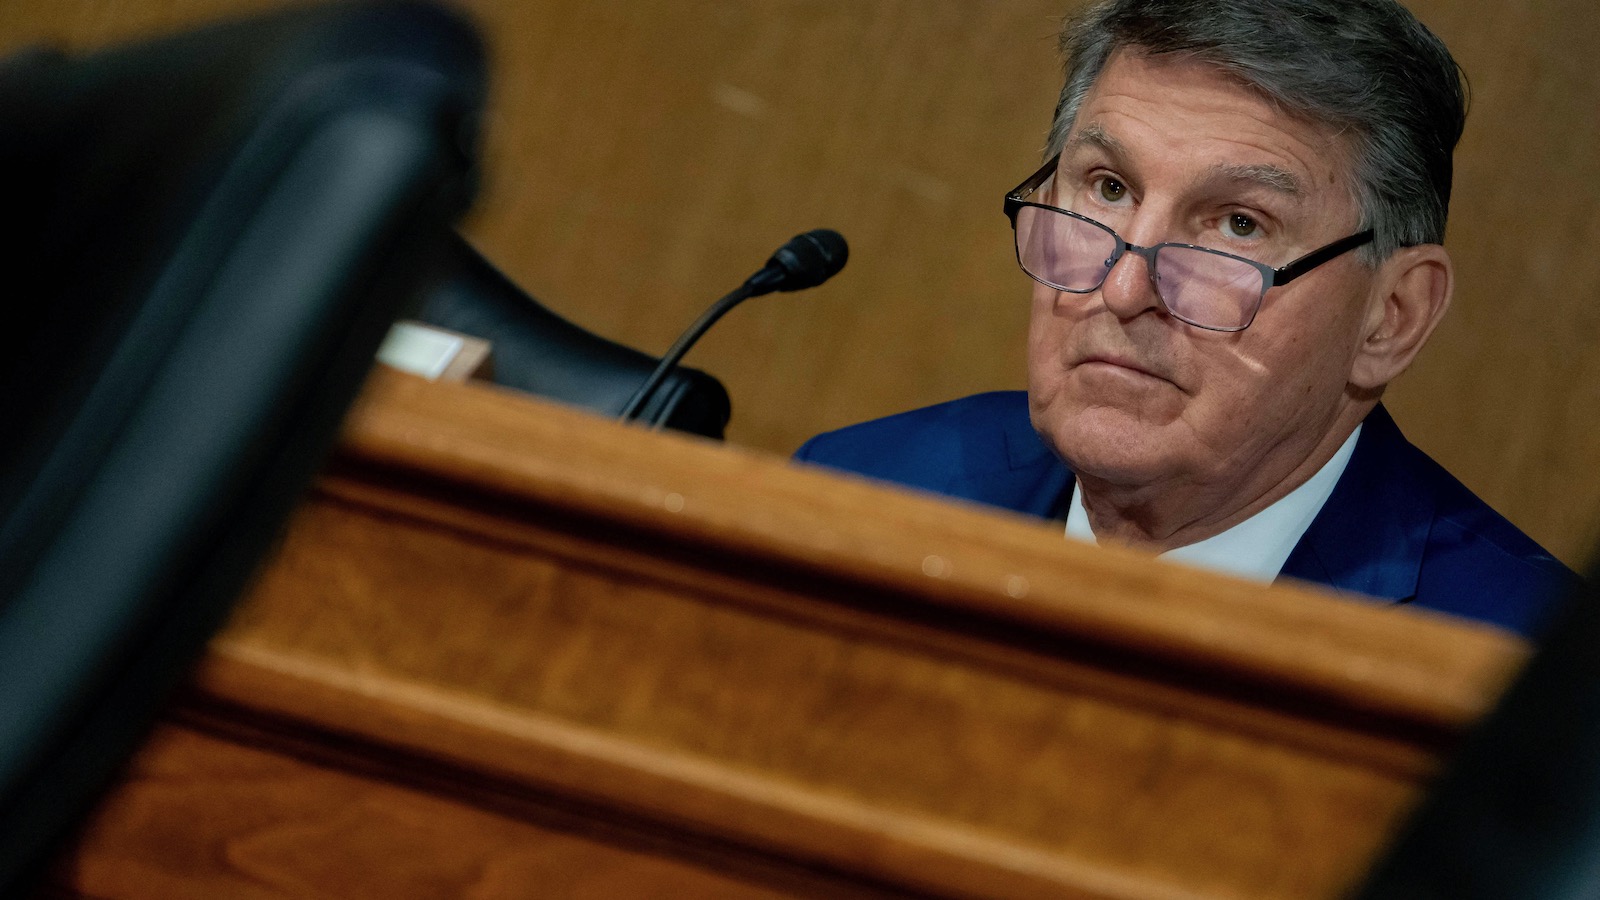 Senator Joe Manchin is seen behind a desk during a hearing of the US Senate Appropriations Committee.